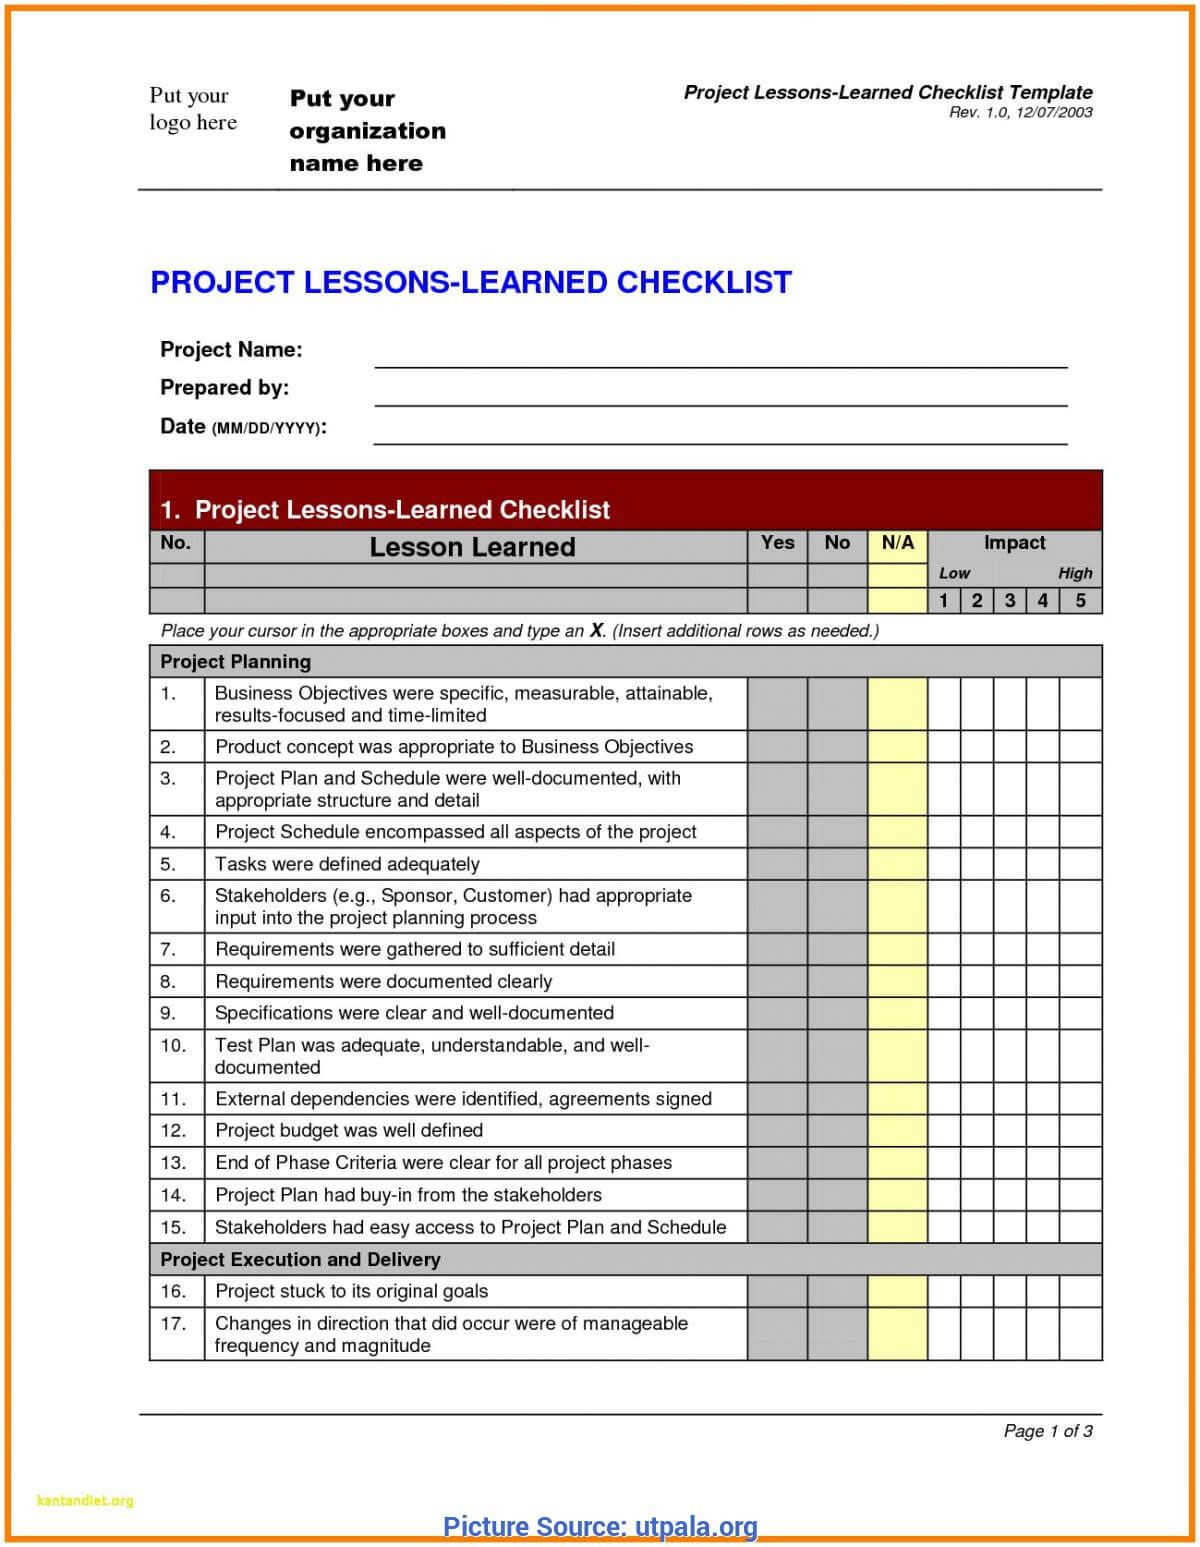 Fresh Lessons Learned Report Template Prince2 Prince2 Pertaining To Prince2 Lessons Learned Report Template